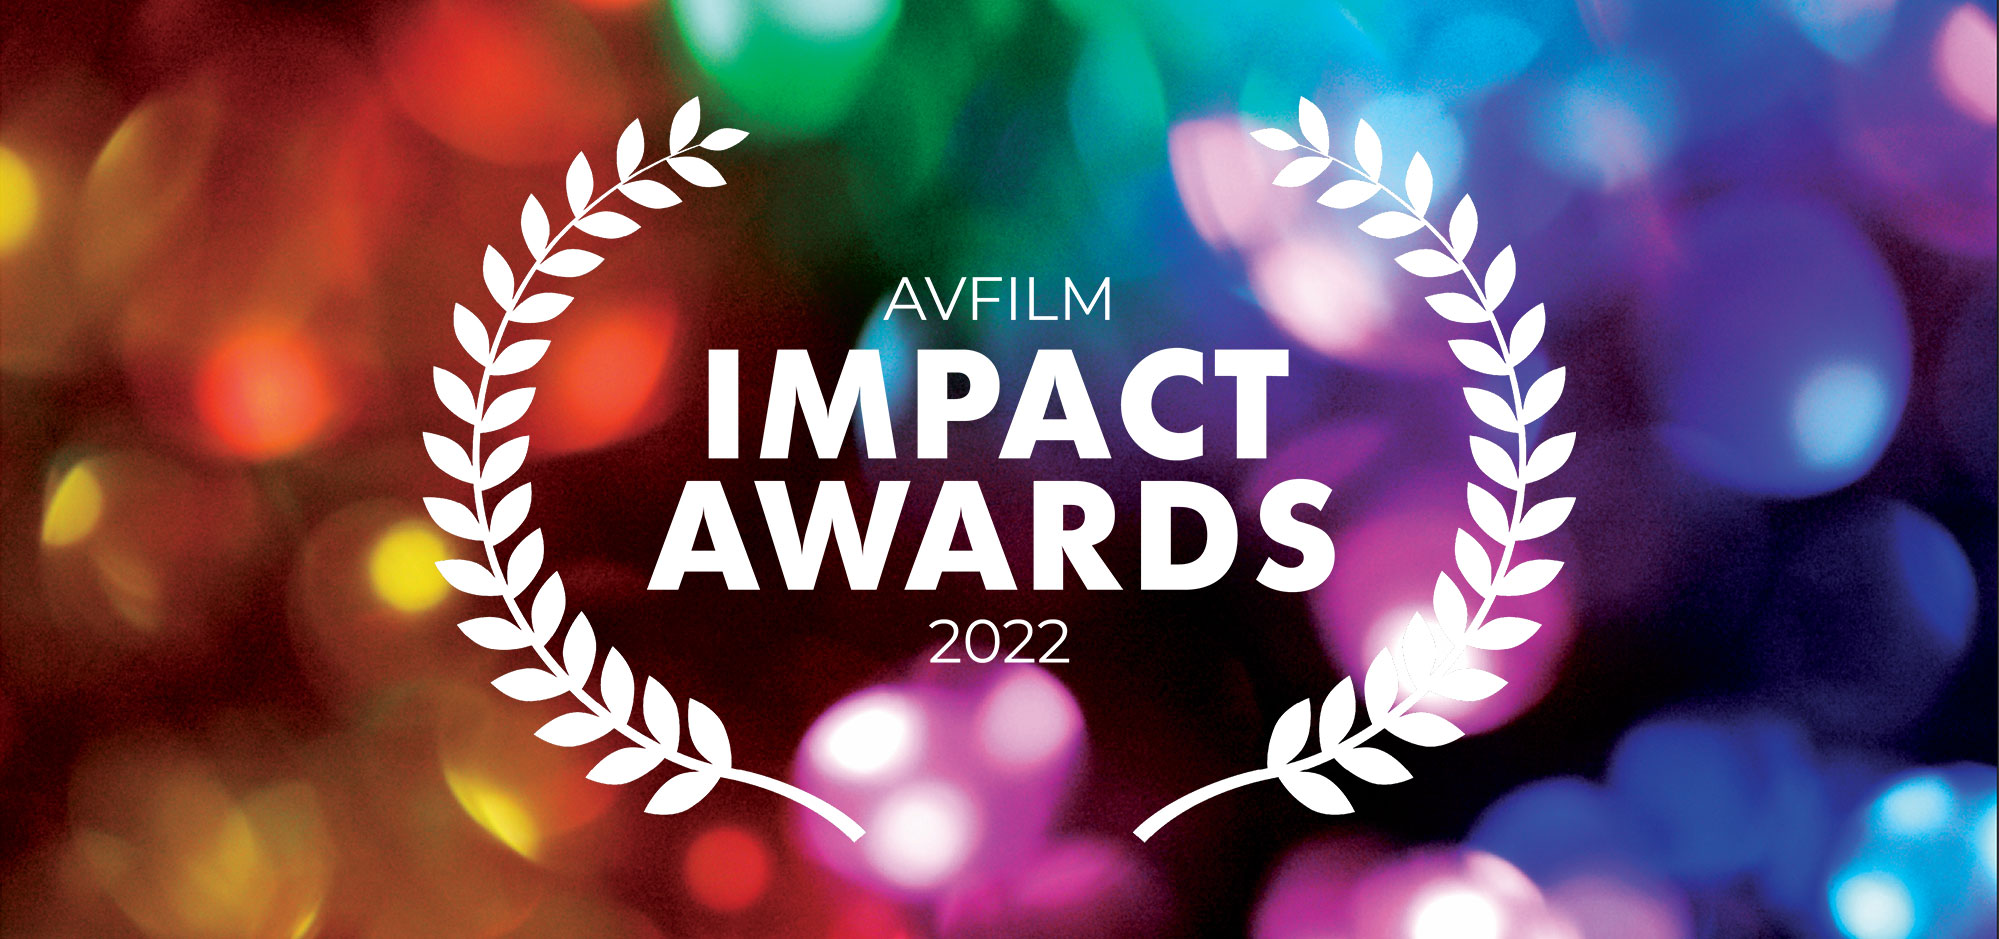 2022 Impact Awards mobile banner with rainbow lights in the background